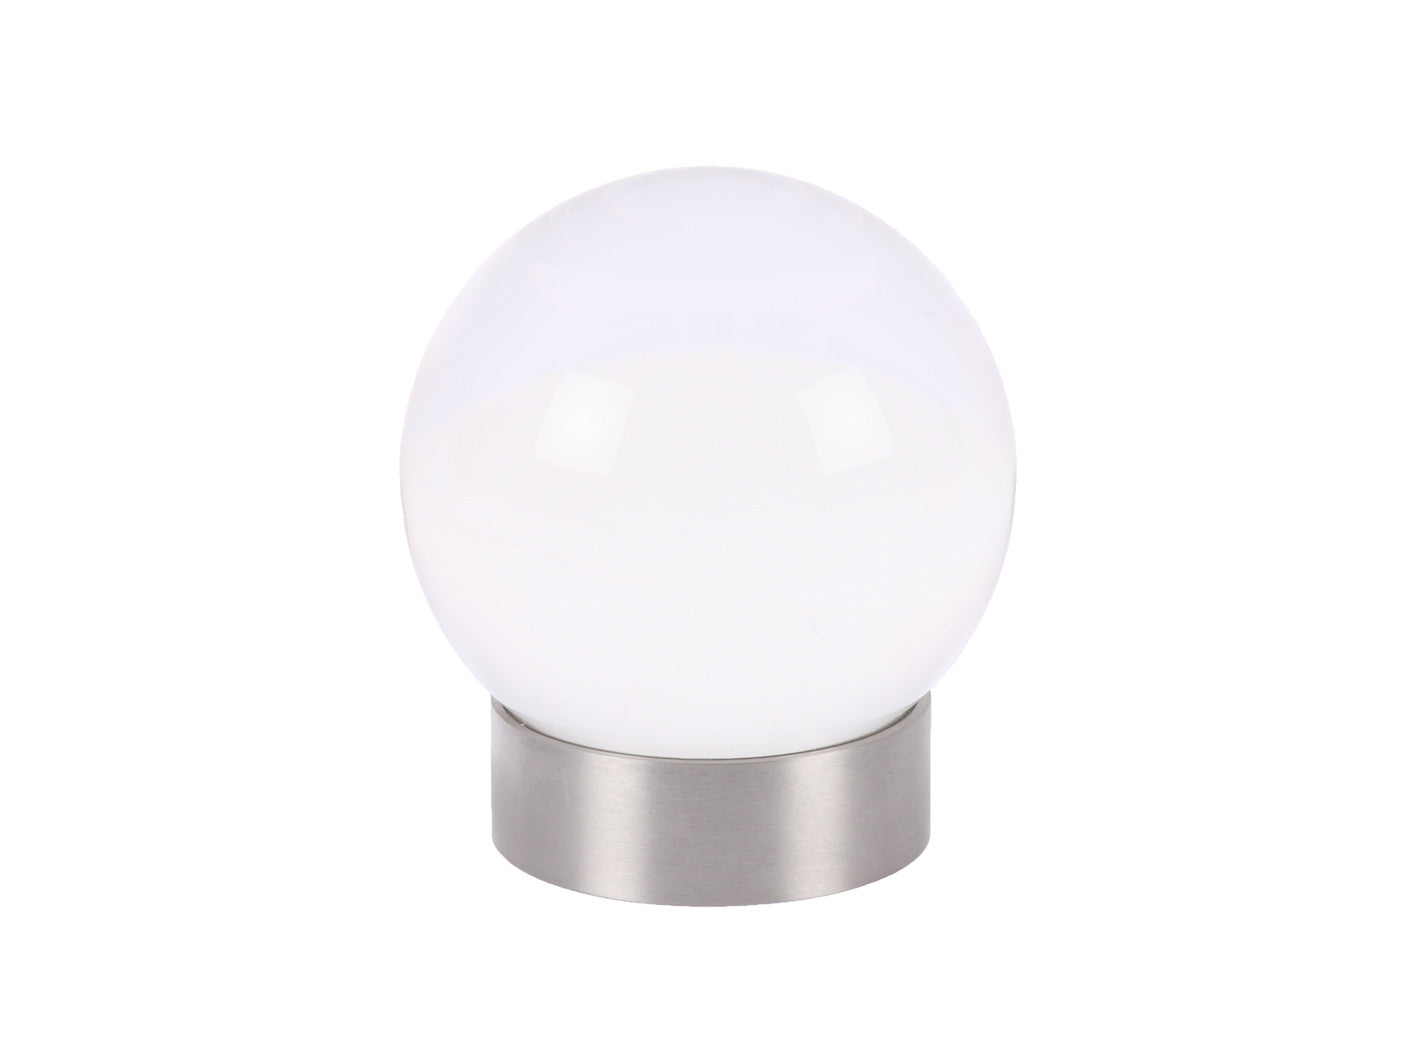 acrylic clear perspex curtain pole ball finial by Walcot House